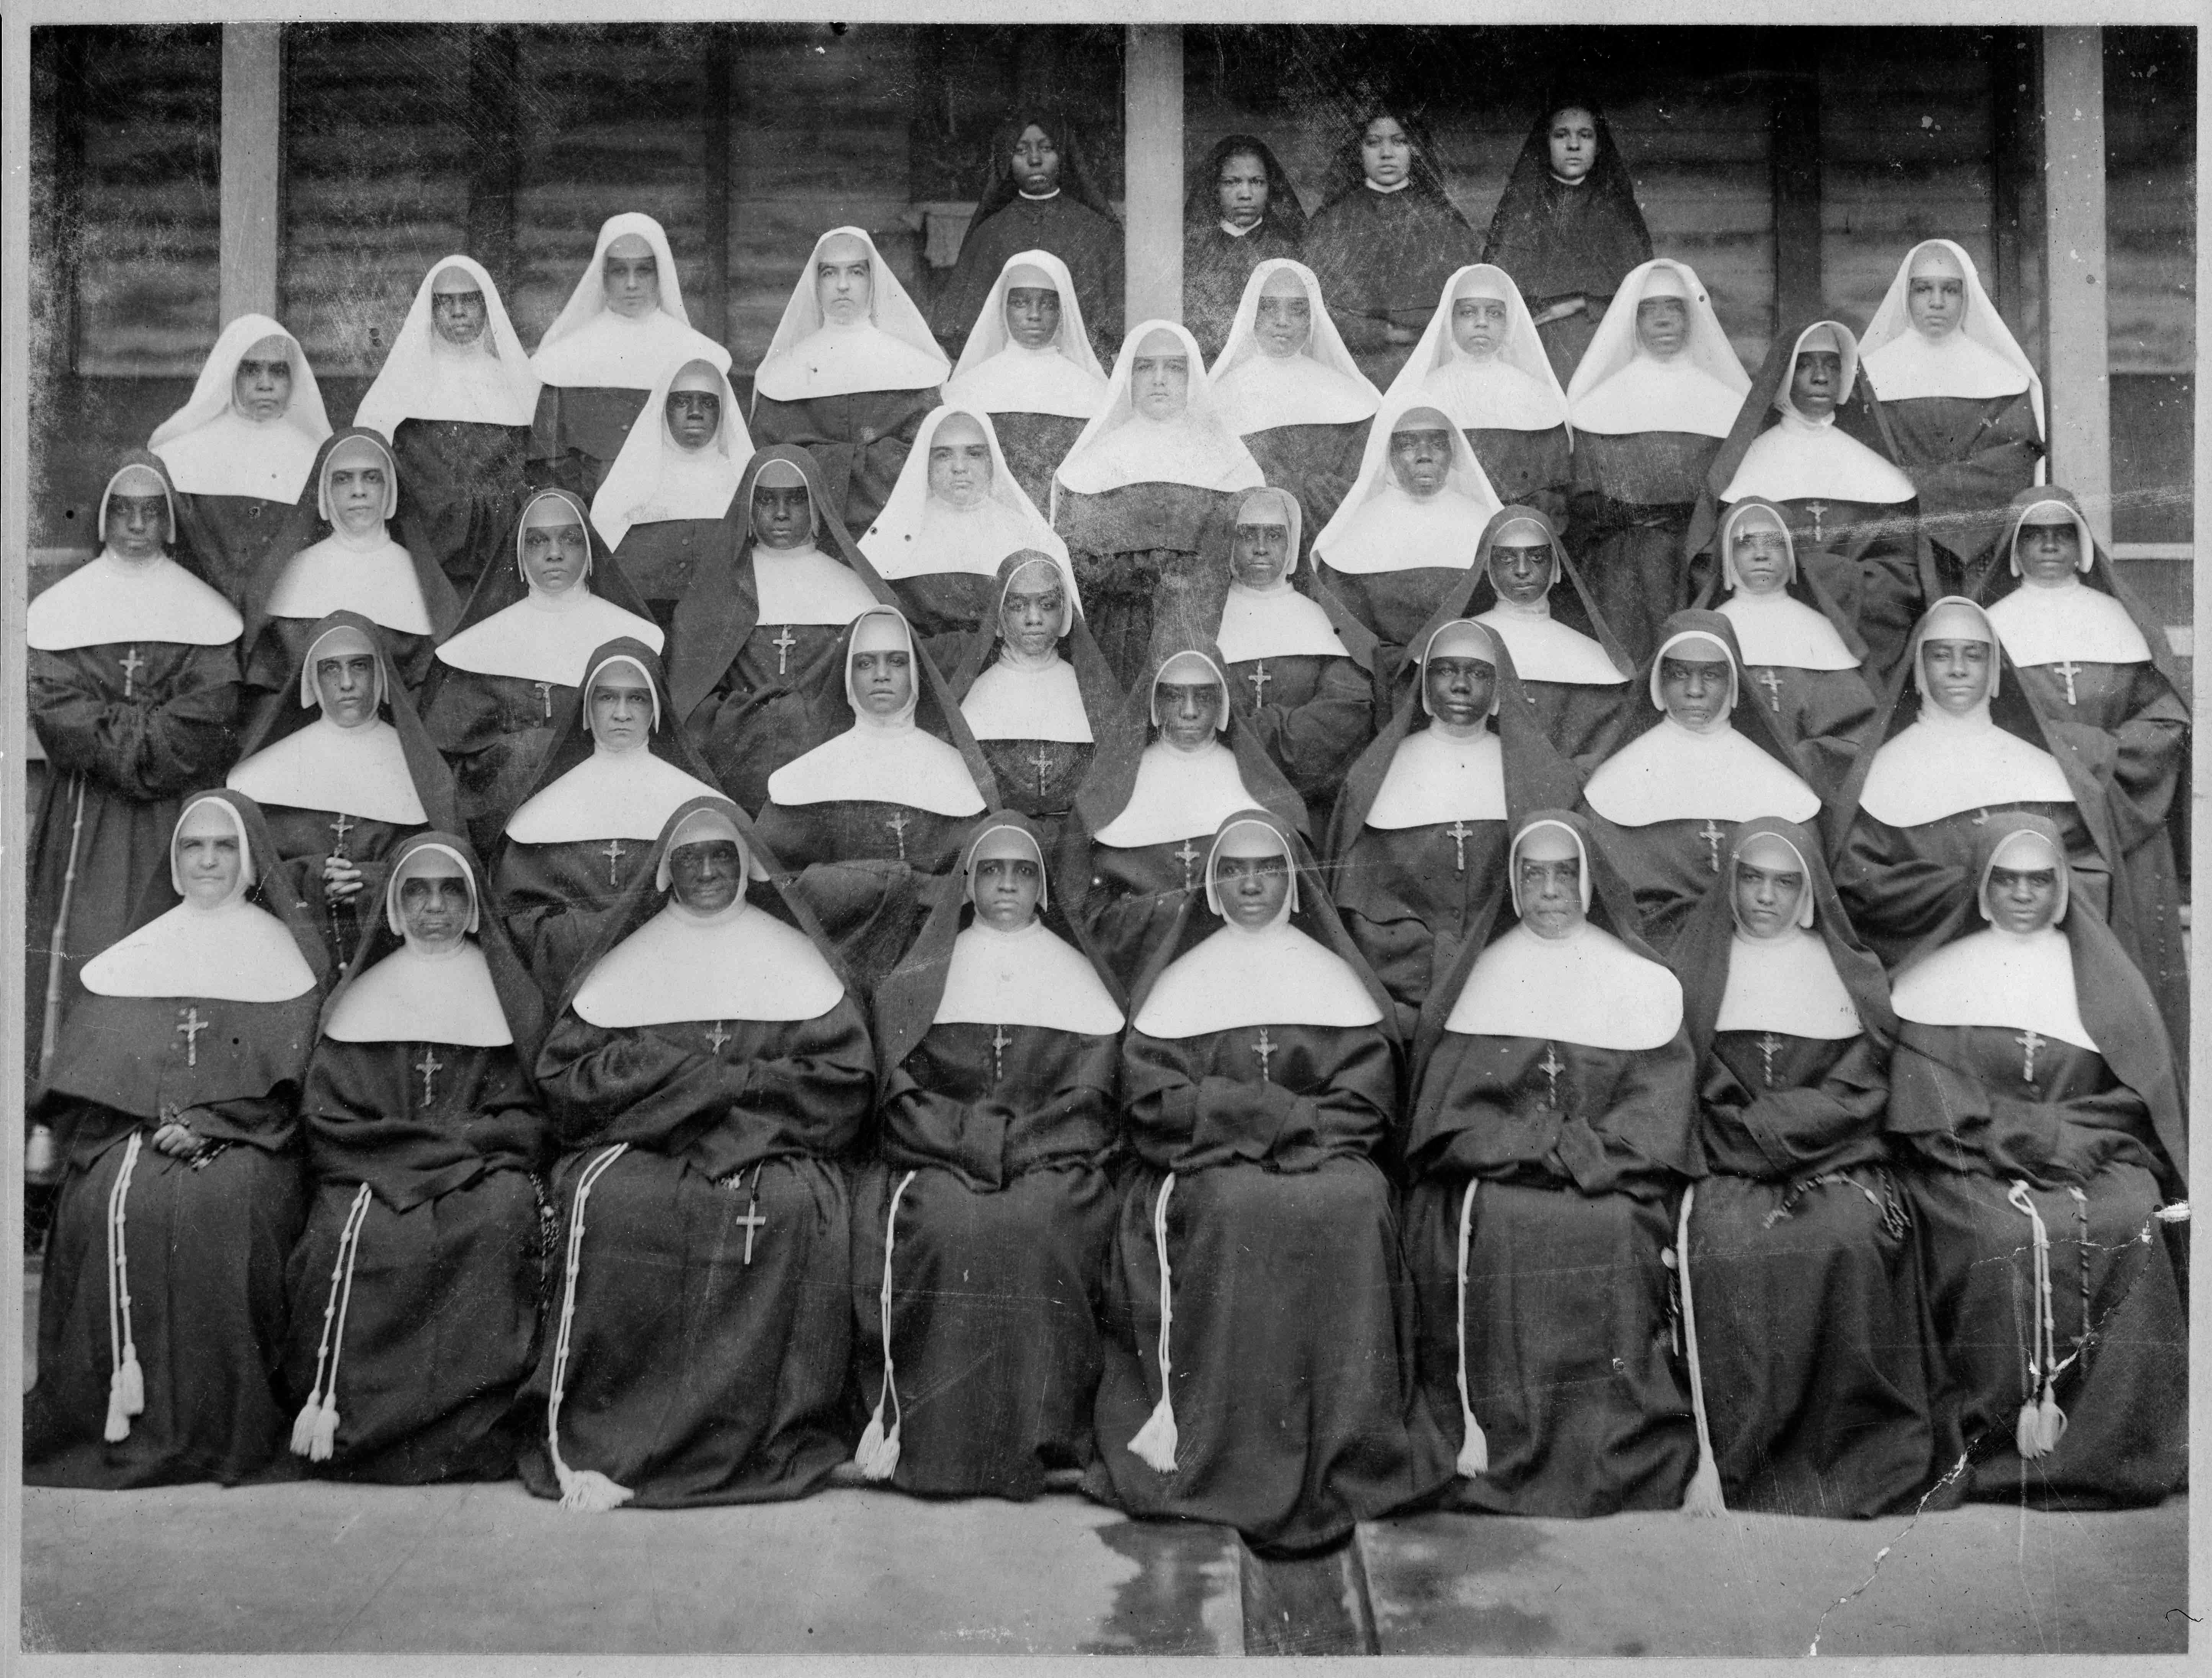 Photograph of Sisters of the Holy Family, New Orleans, Louisiana, ca. 1899